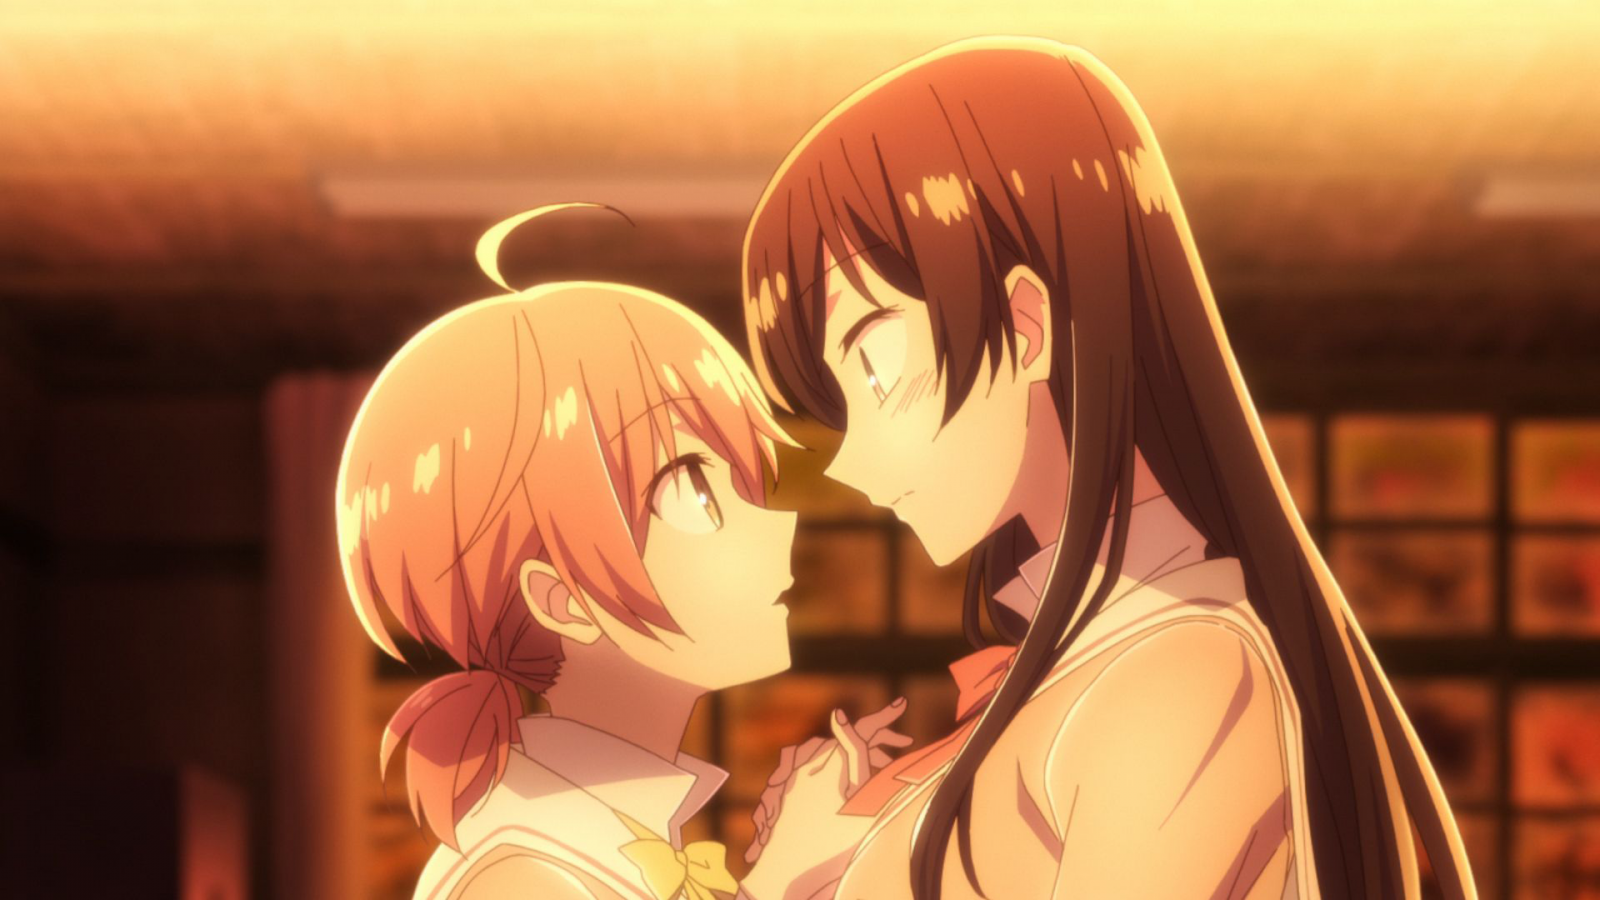 Bloom Into You - Volume 1: Episode 01-04 [DVD] Image 10